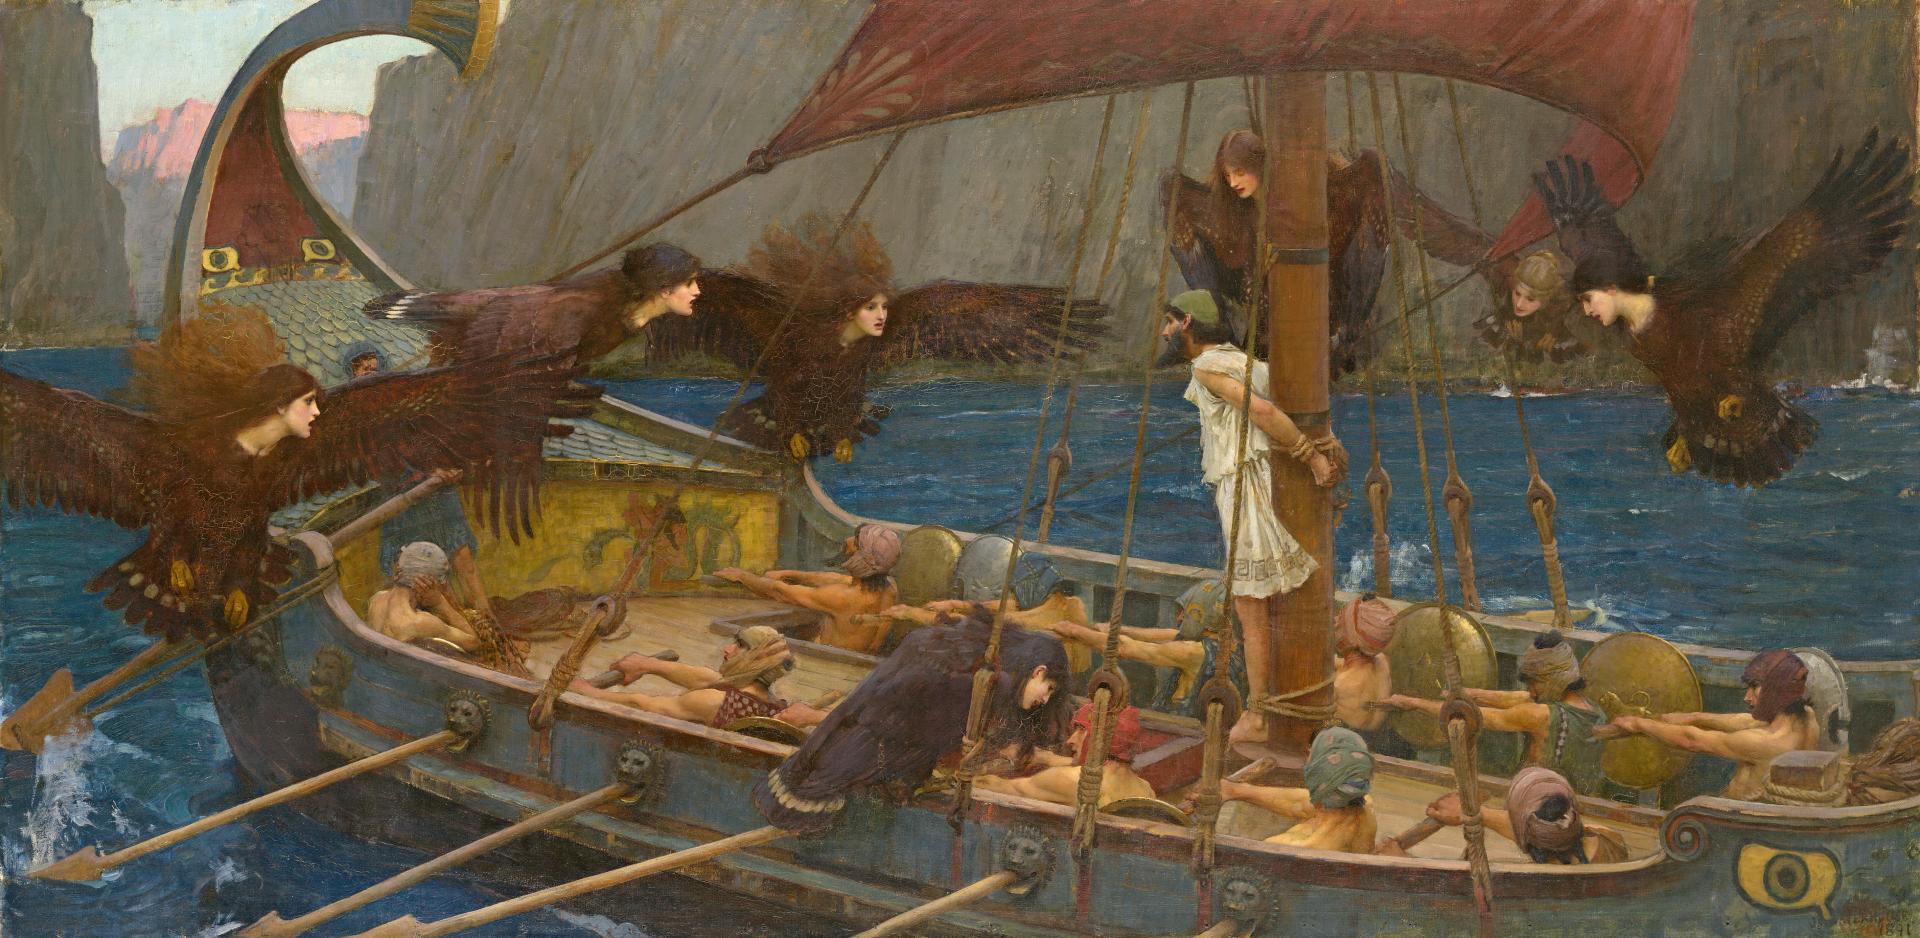 J. W. Waterhouse's 'Ulysses and the Sirens': Breaking Tradition and  Revealing Fears - Brewminate: A Bold Blend of News and Ideas